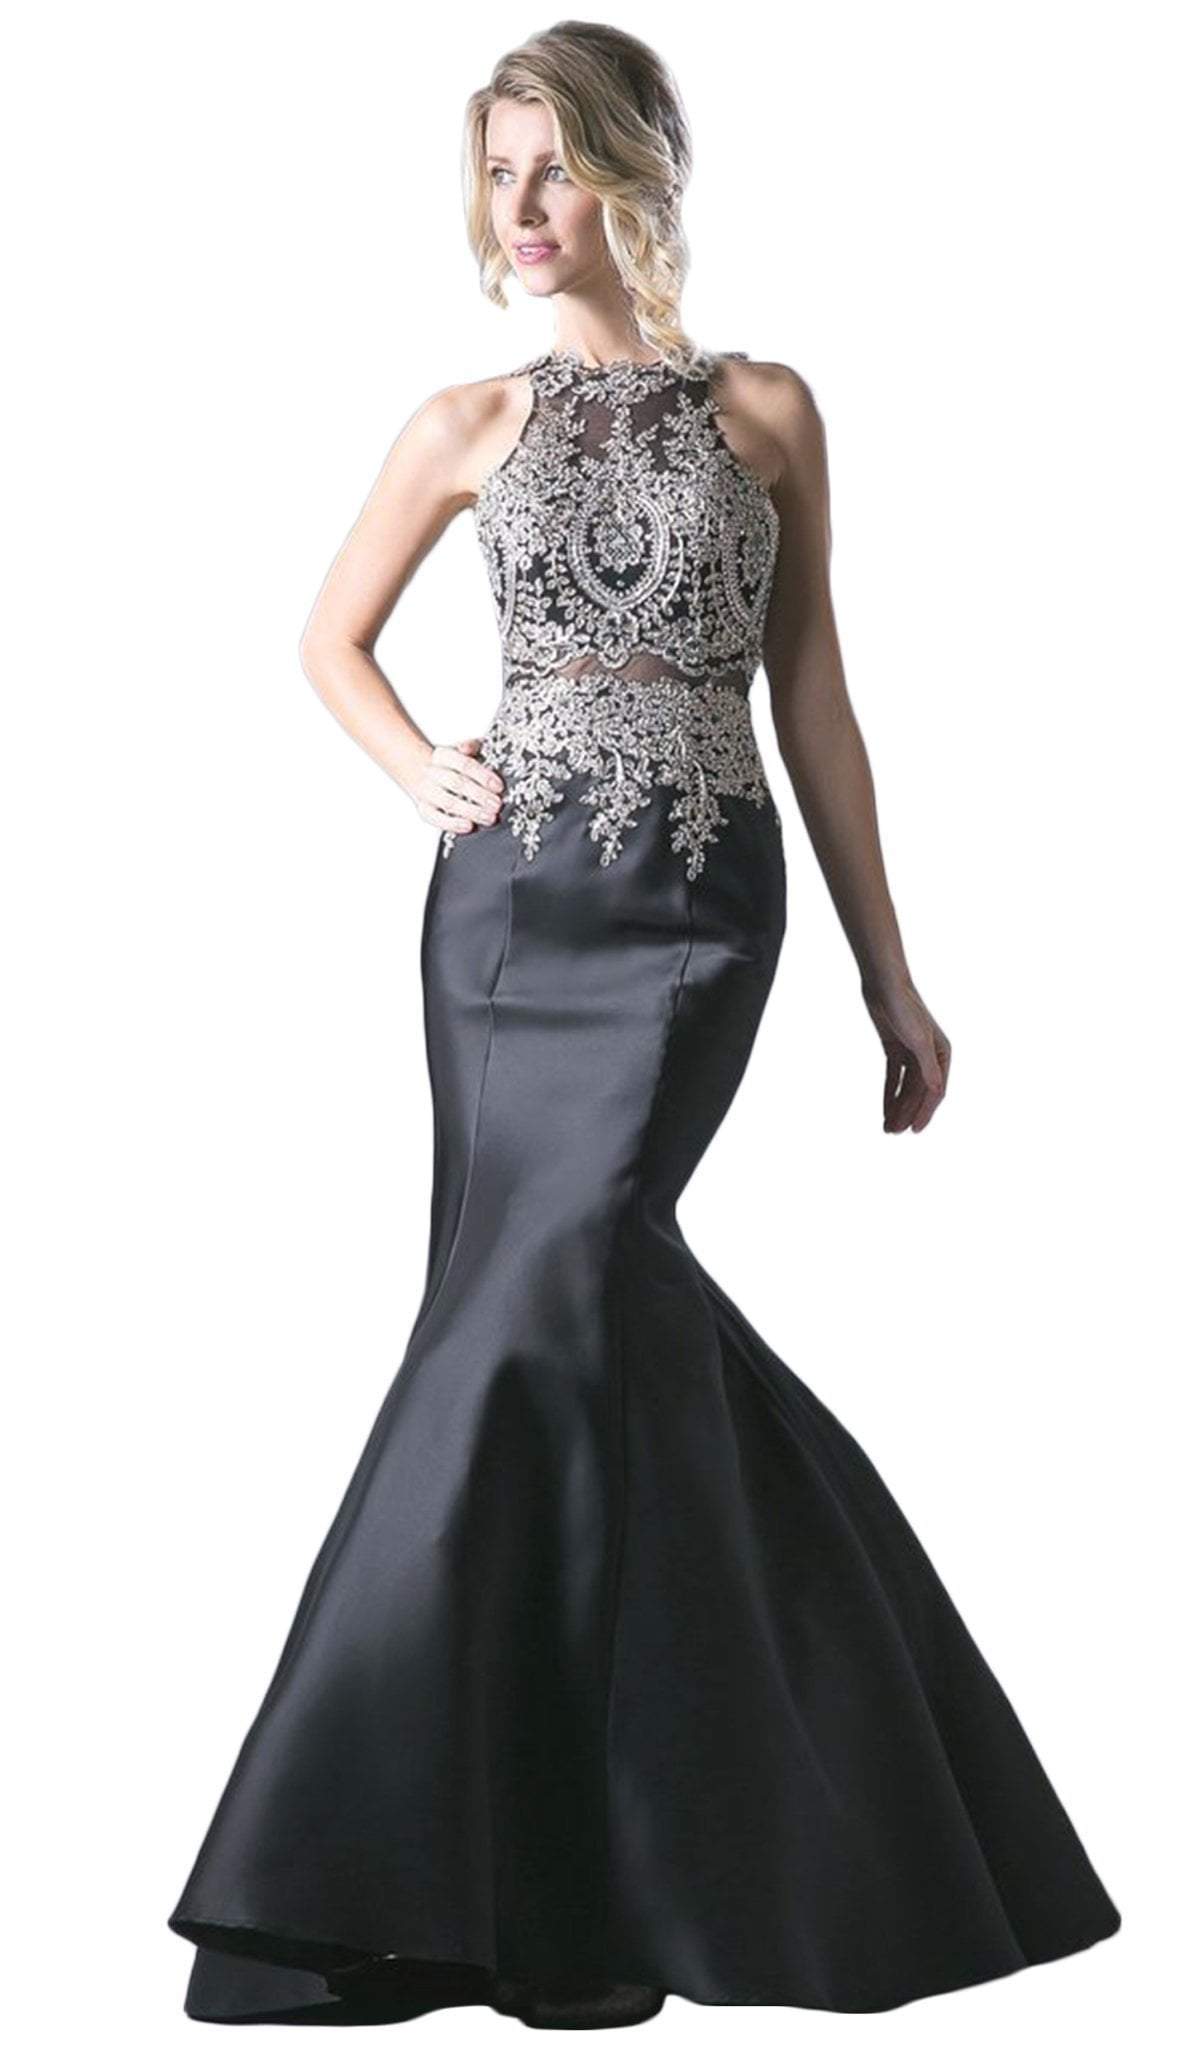 Cinderella Divine - Metallic Lace Adorned High Neck Mermaid Evening Gown Special Occasion Dress 2 / Black